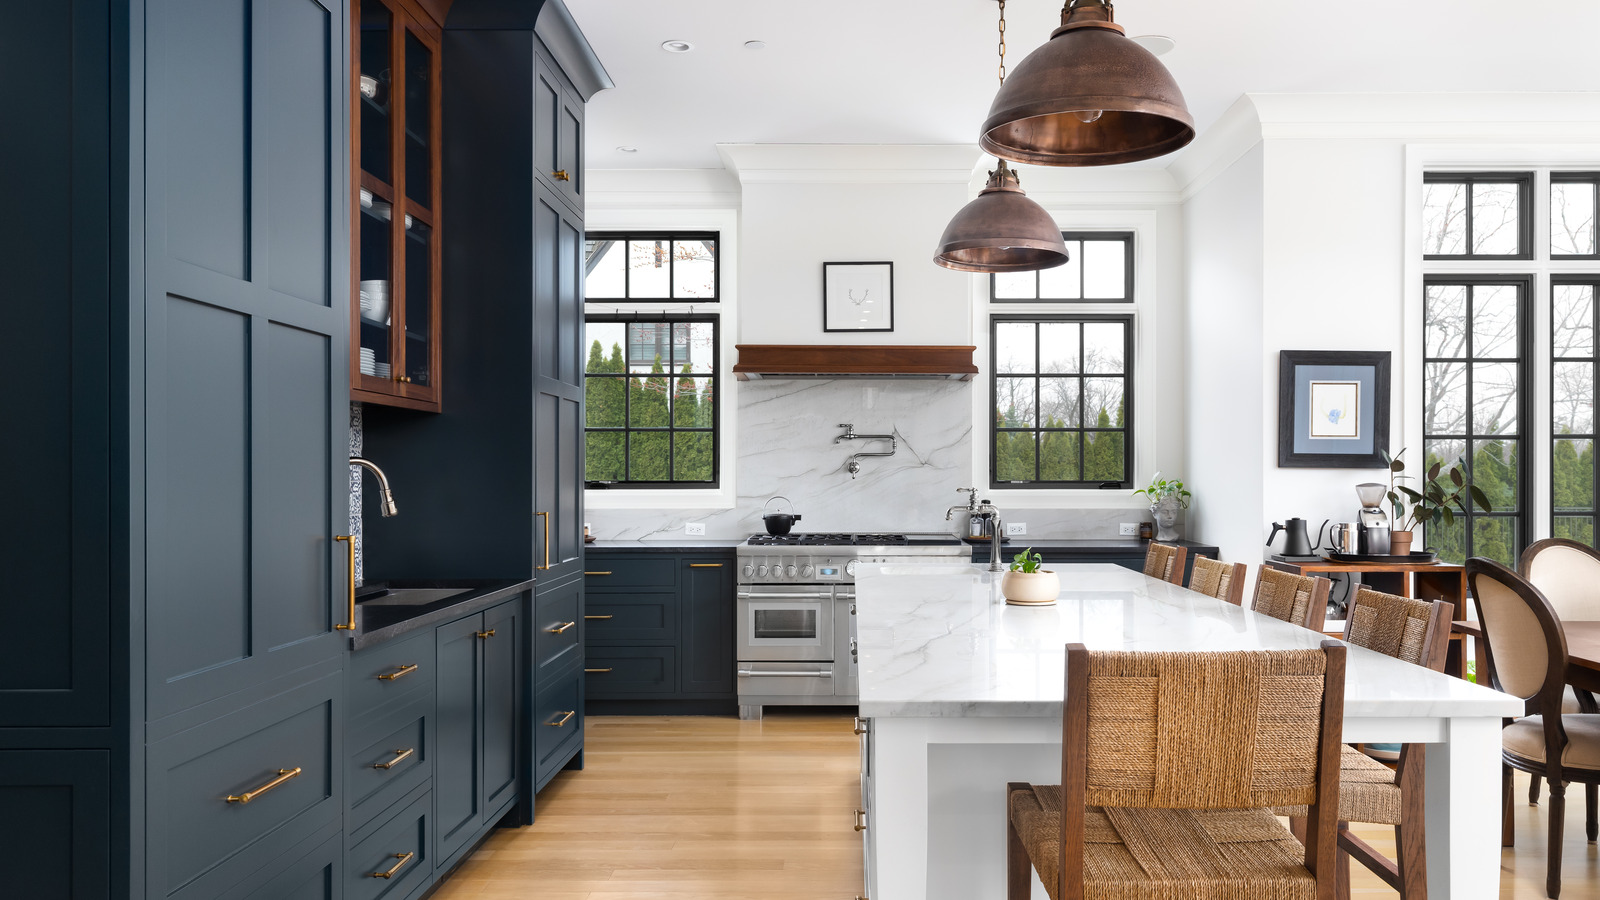 Over 37% Of People Agree That This Is Their Favorite Kitchen Design Feature